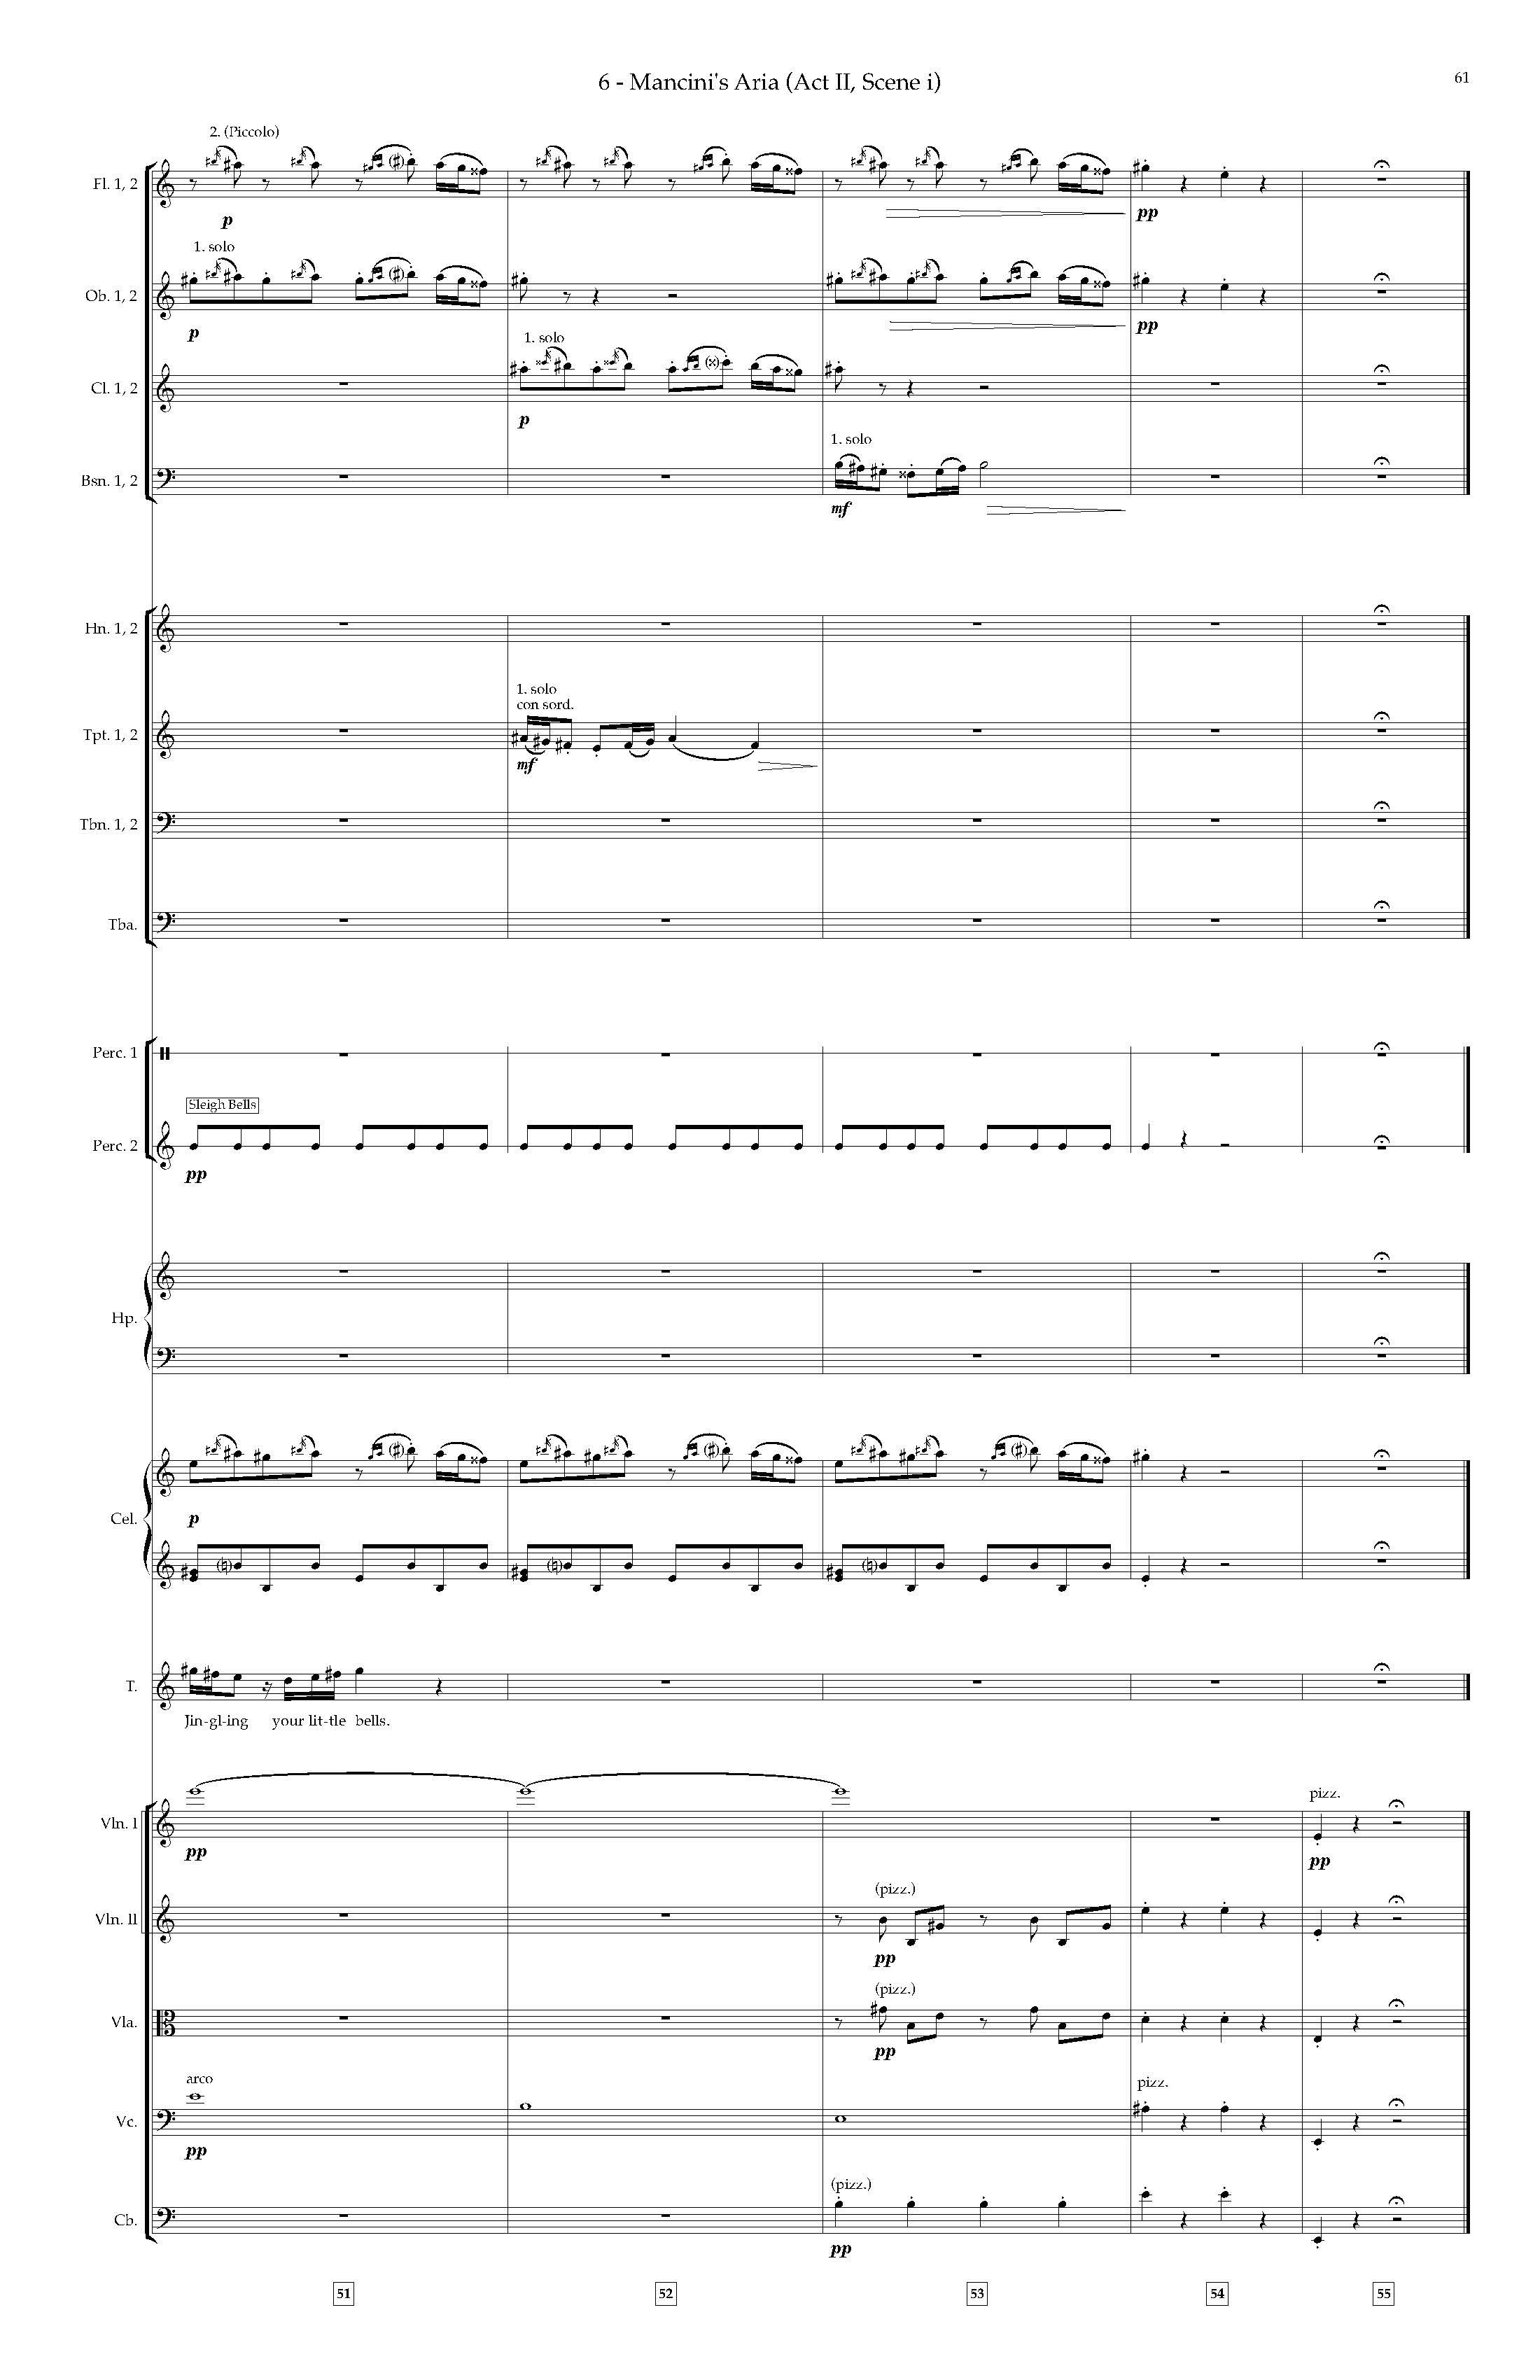 Arias and Interludes from HWGS - Complete Score_Page_67.jpg